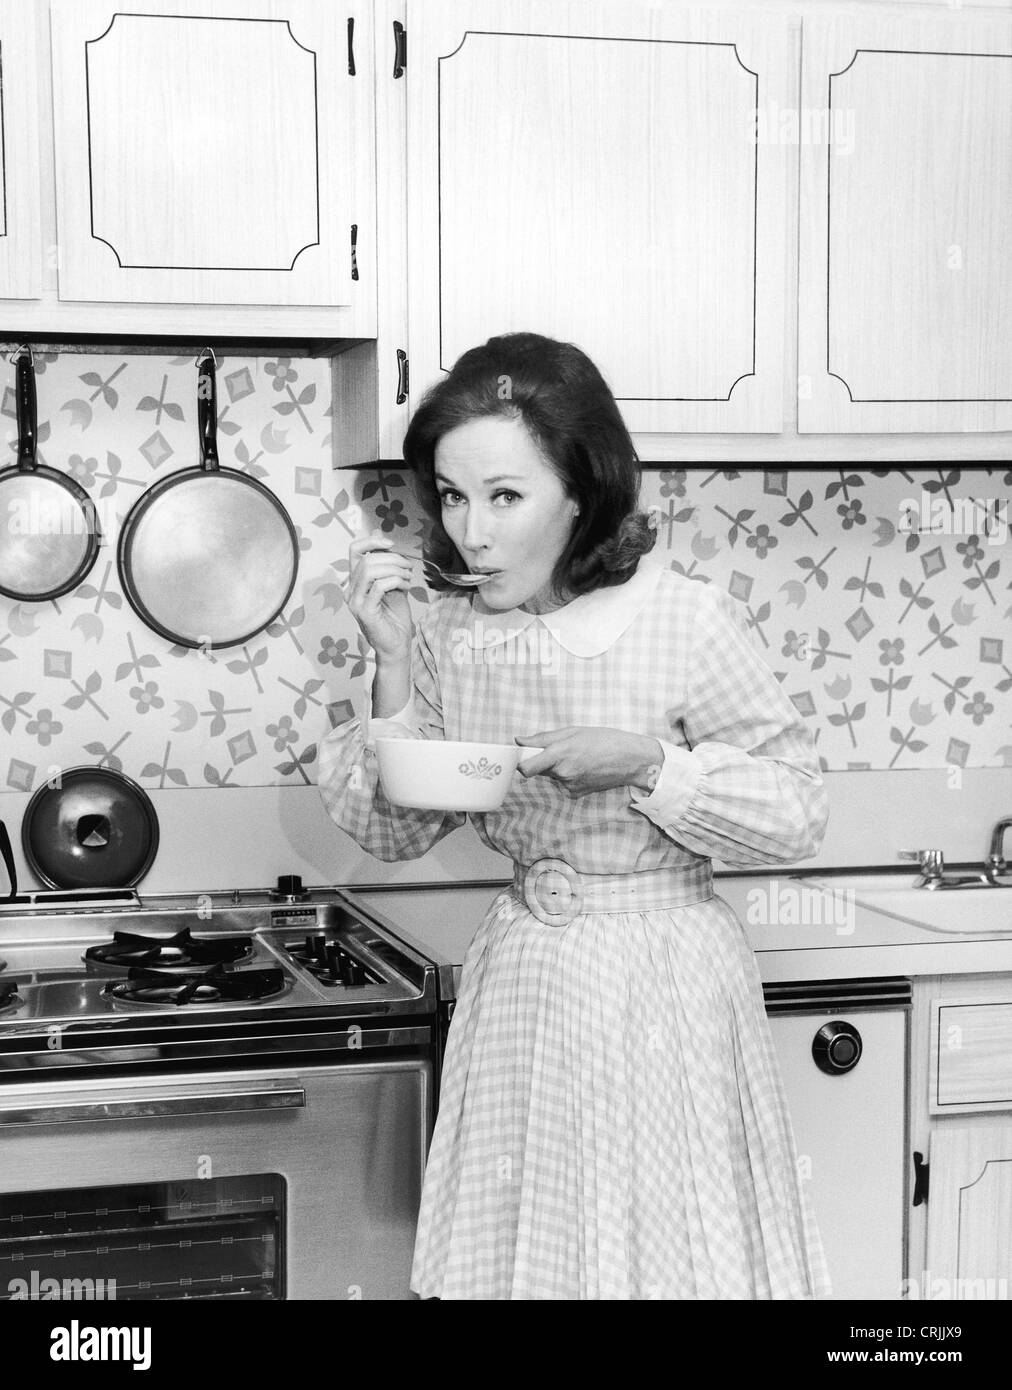 Homemaker tasting food from cooking pot Stock Photo